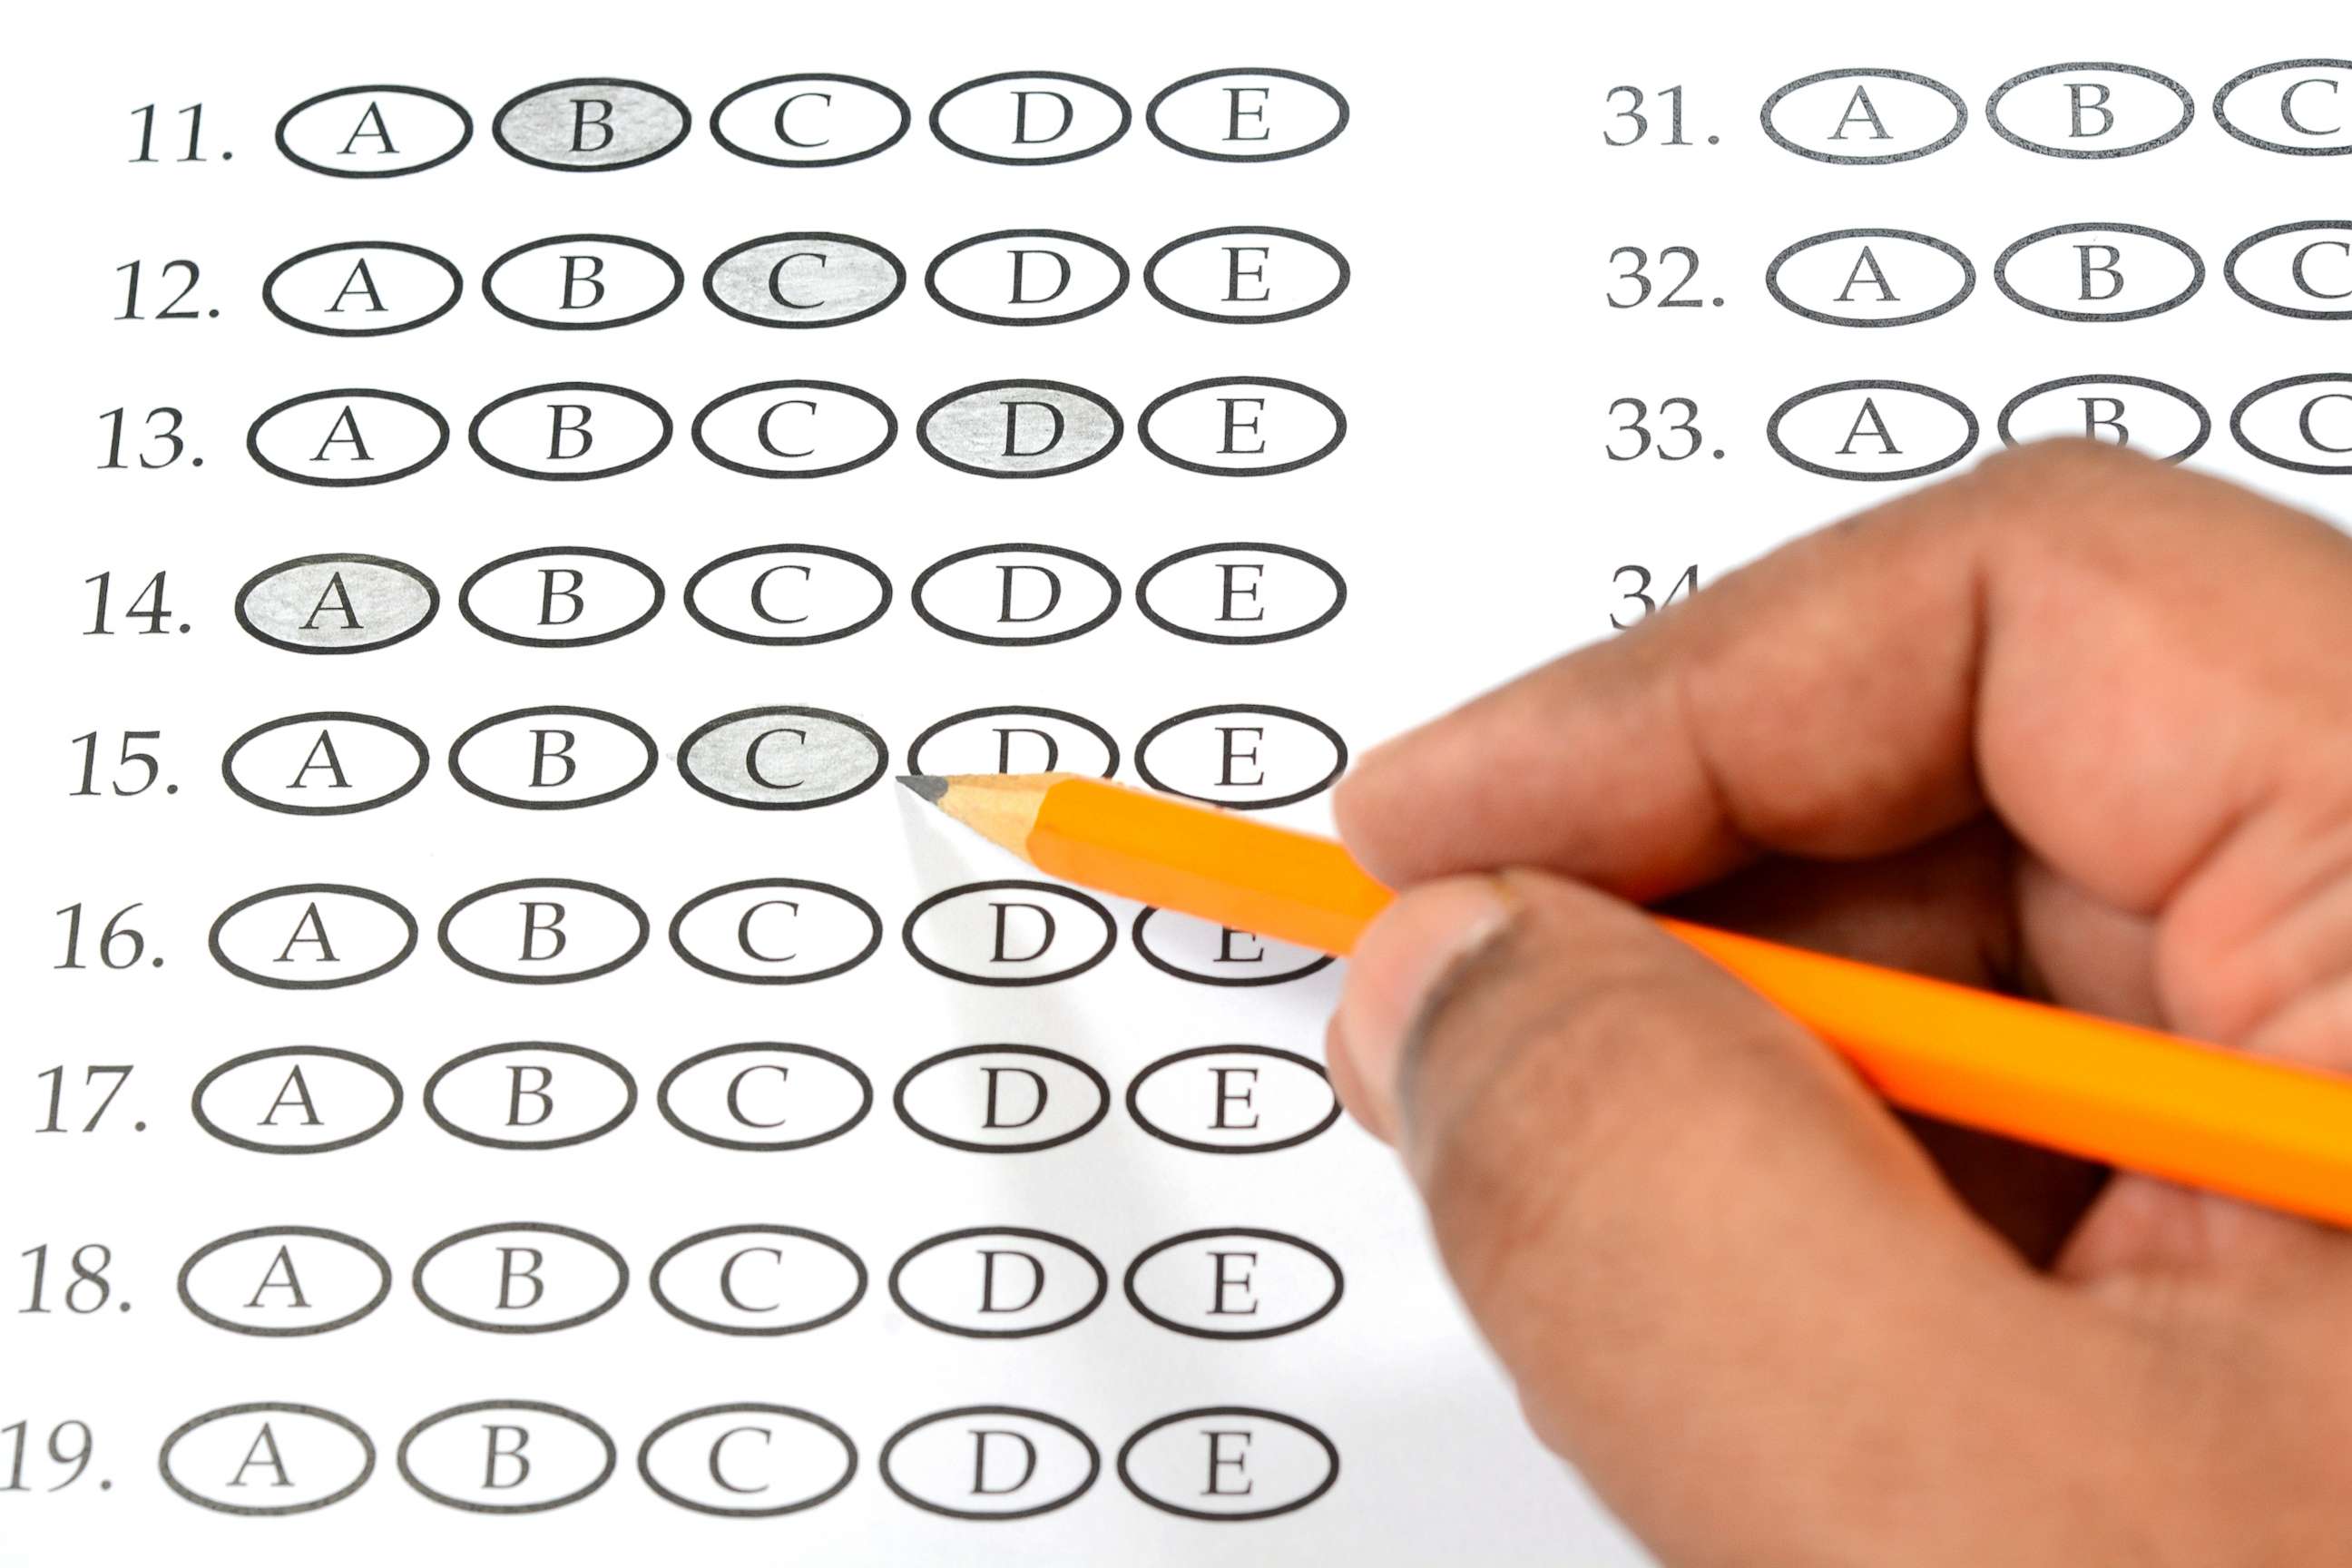 PHOTO: A student appears to be filling out a multiple choice exam paper with a pencil.